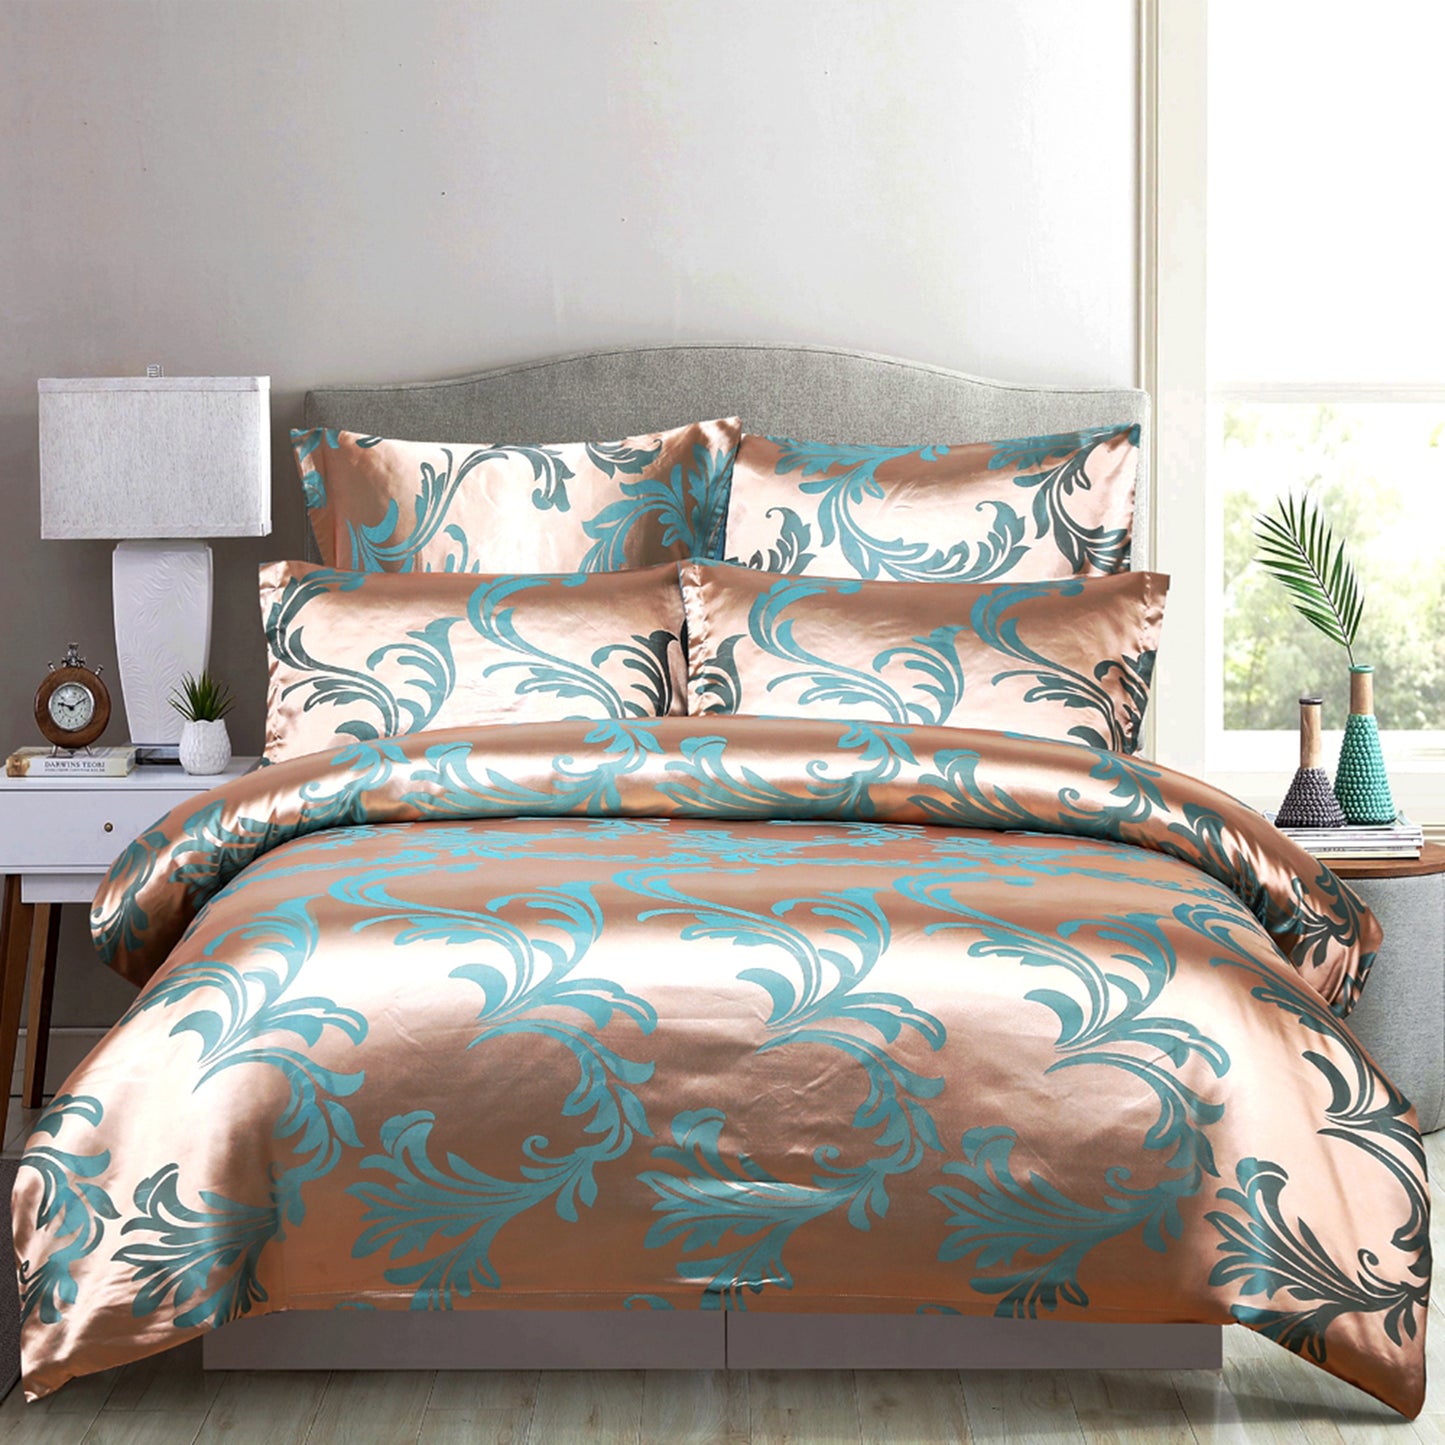 WONGS BEDDING Dark Copper Embroidery Satin Craft Duvet Cover Set With 2 Pillow Case